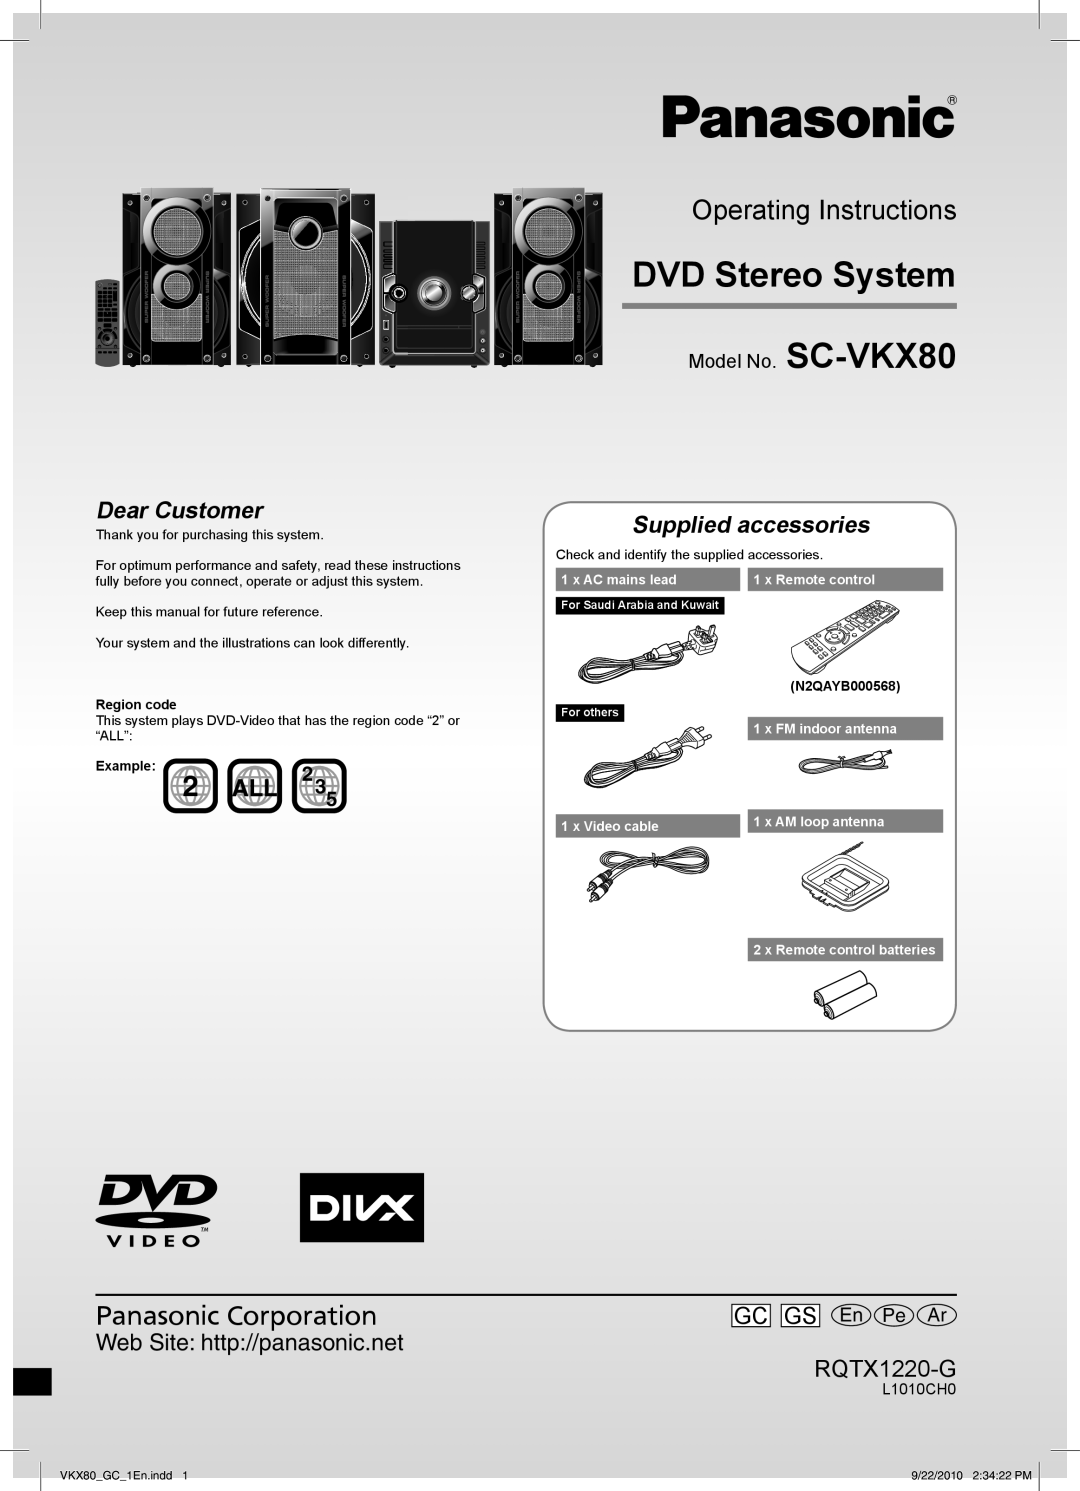 Panasonic SC-VKX80 manual DVD Stereo System, Operating Instructions, Supplied accessories, Panasonic Corporation, L1010CH0 